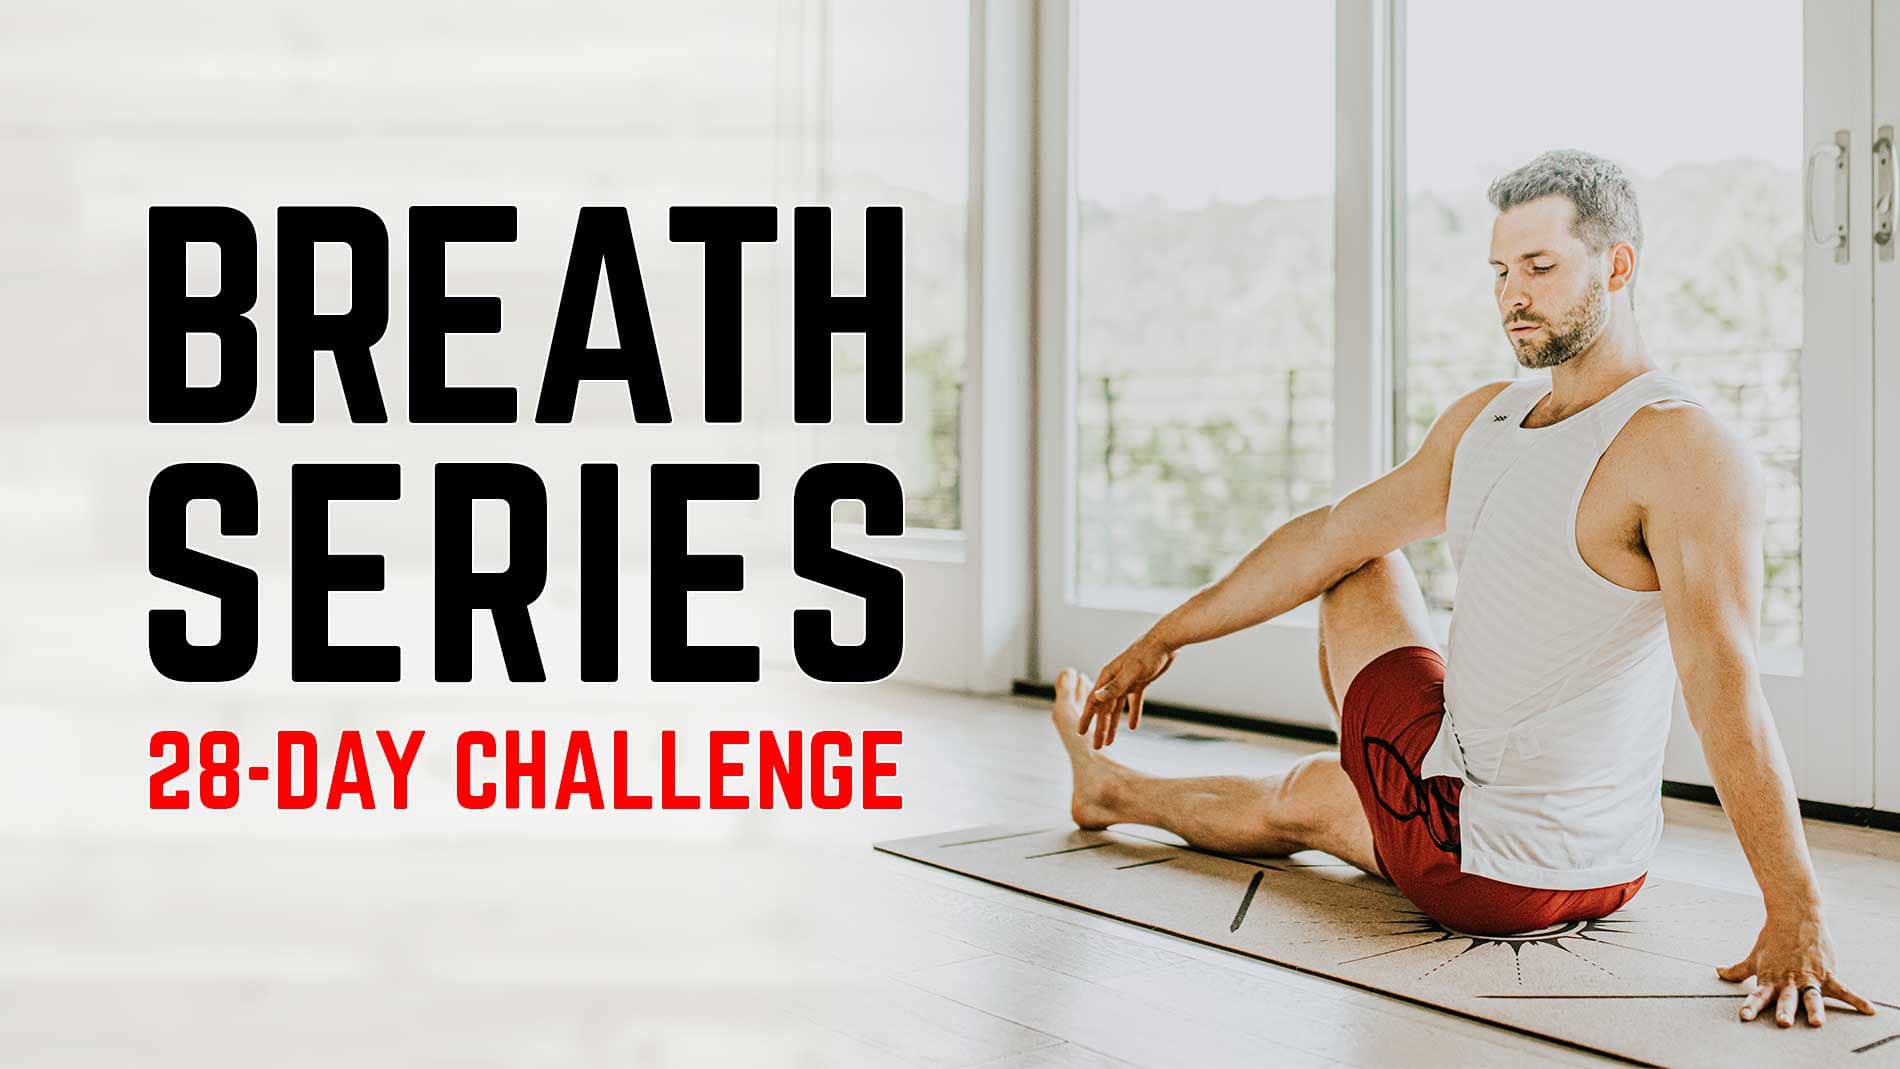 The Breath Series 28-Day Challenge